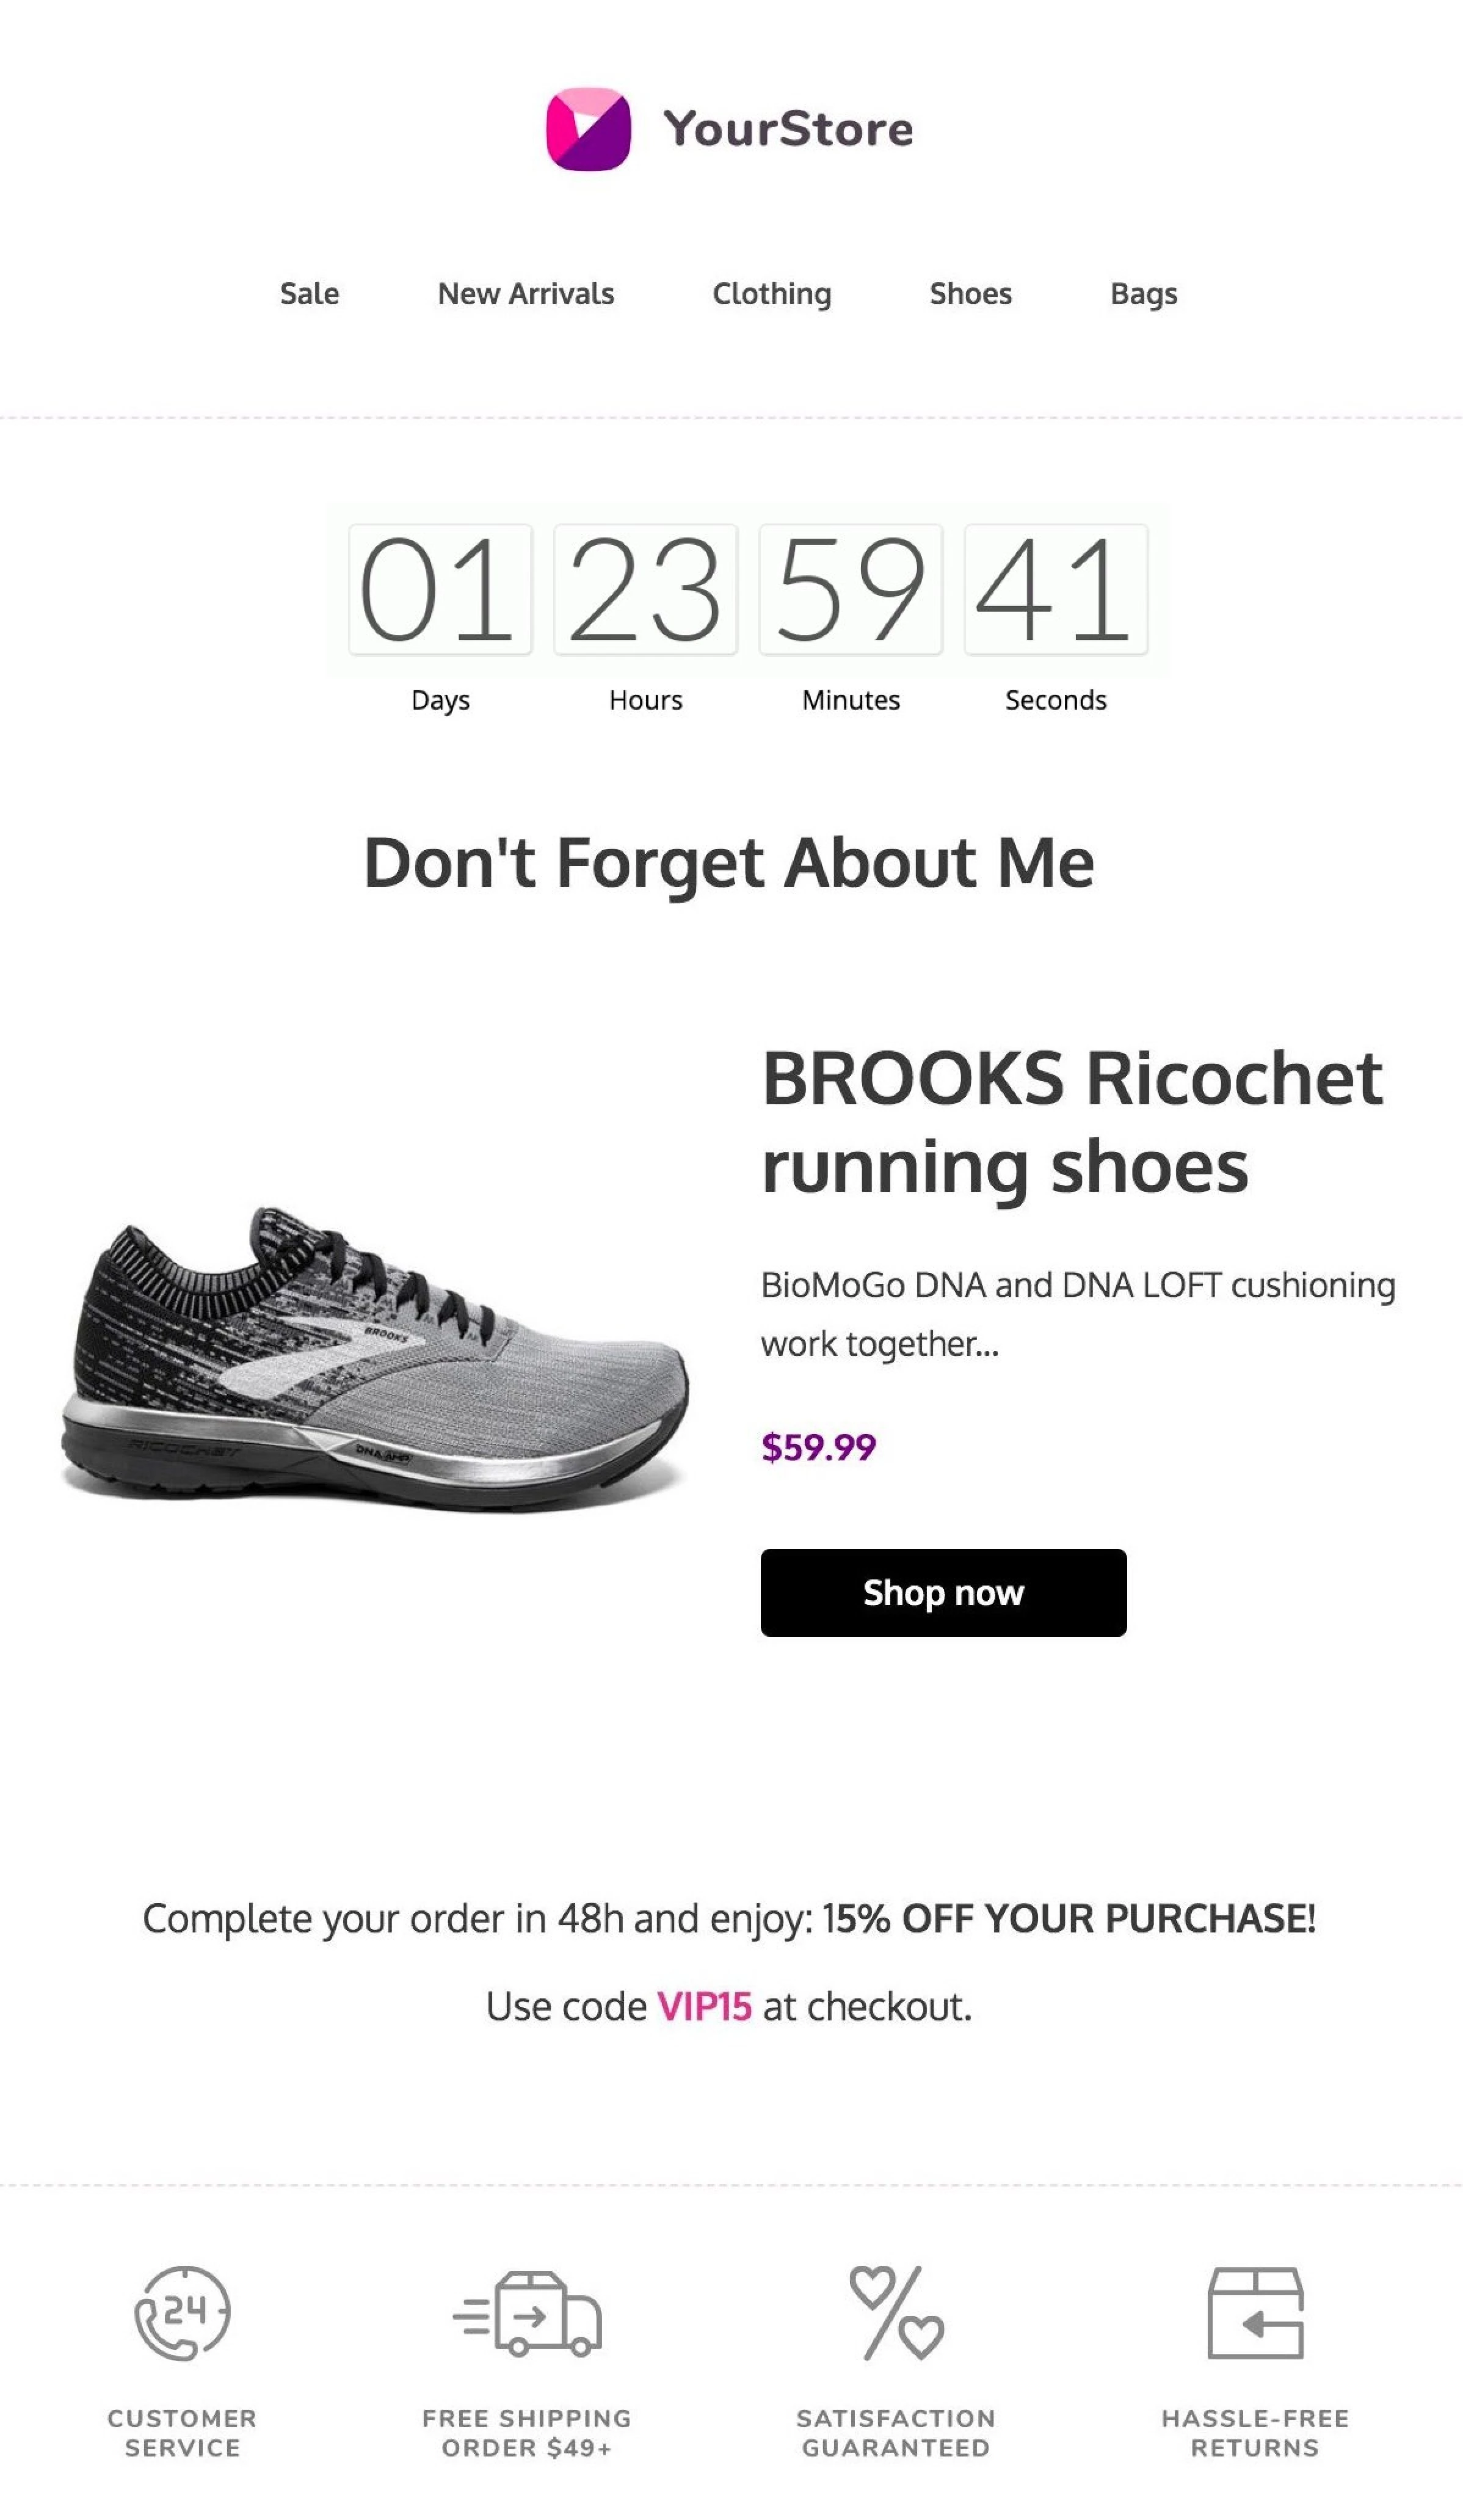 Abandoned shopping cart email example with countdown timer